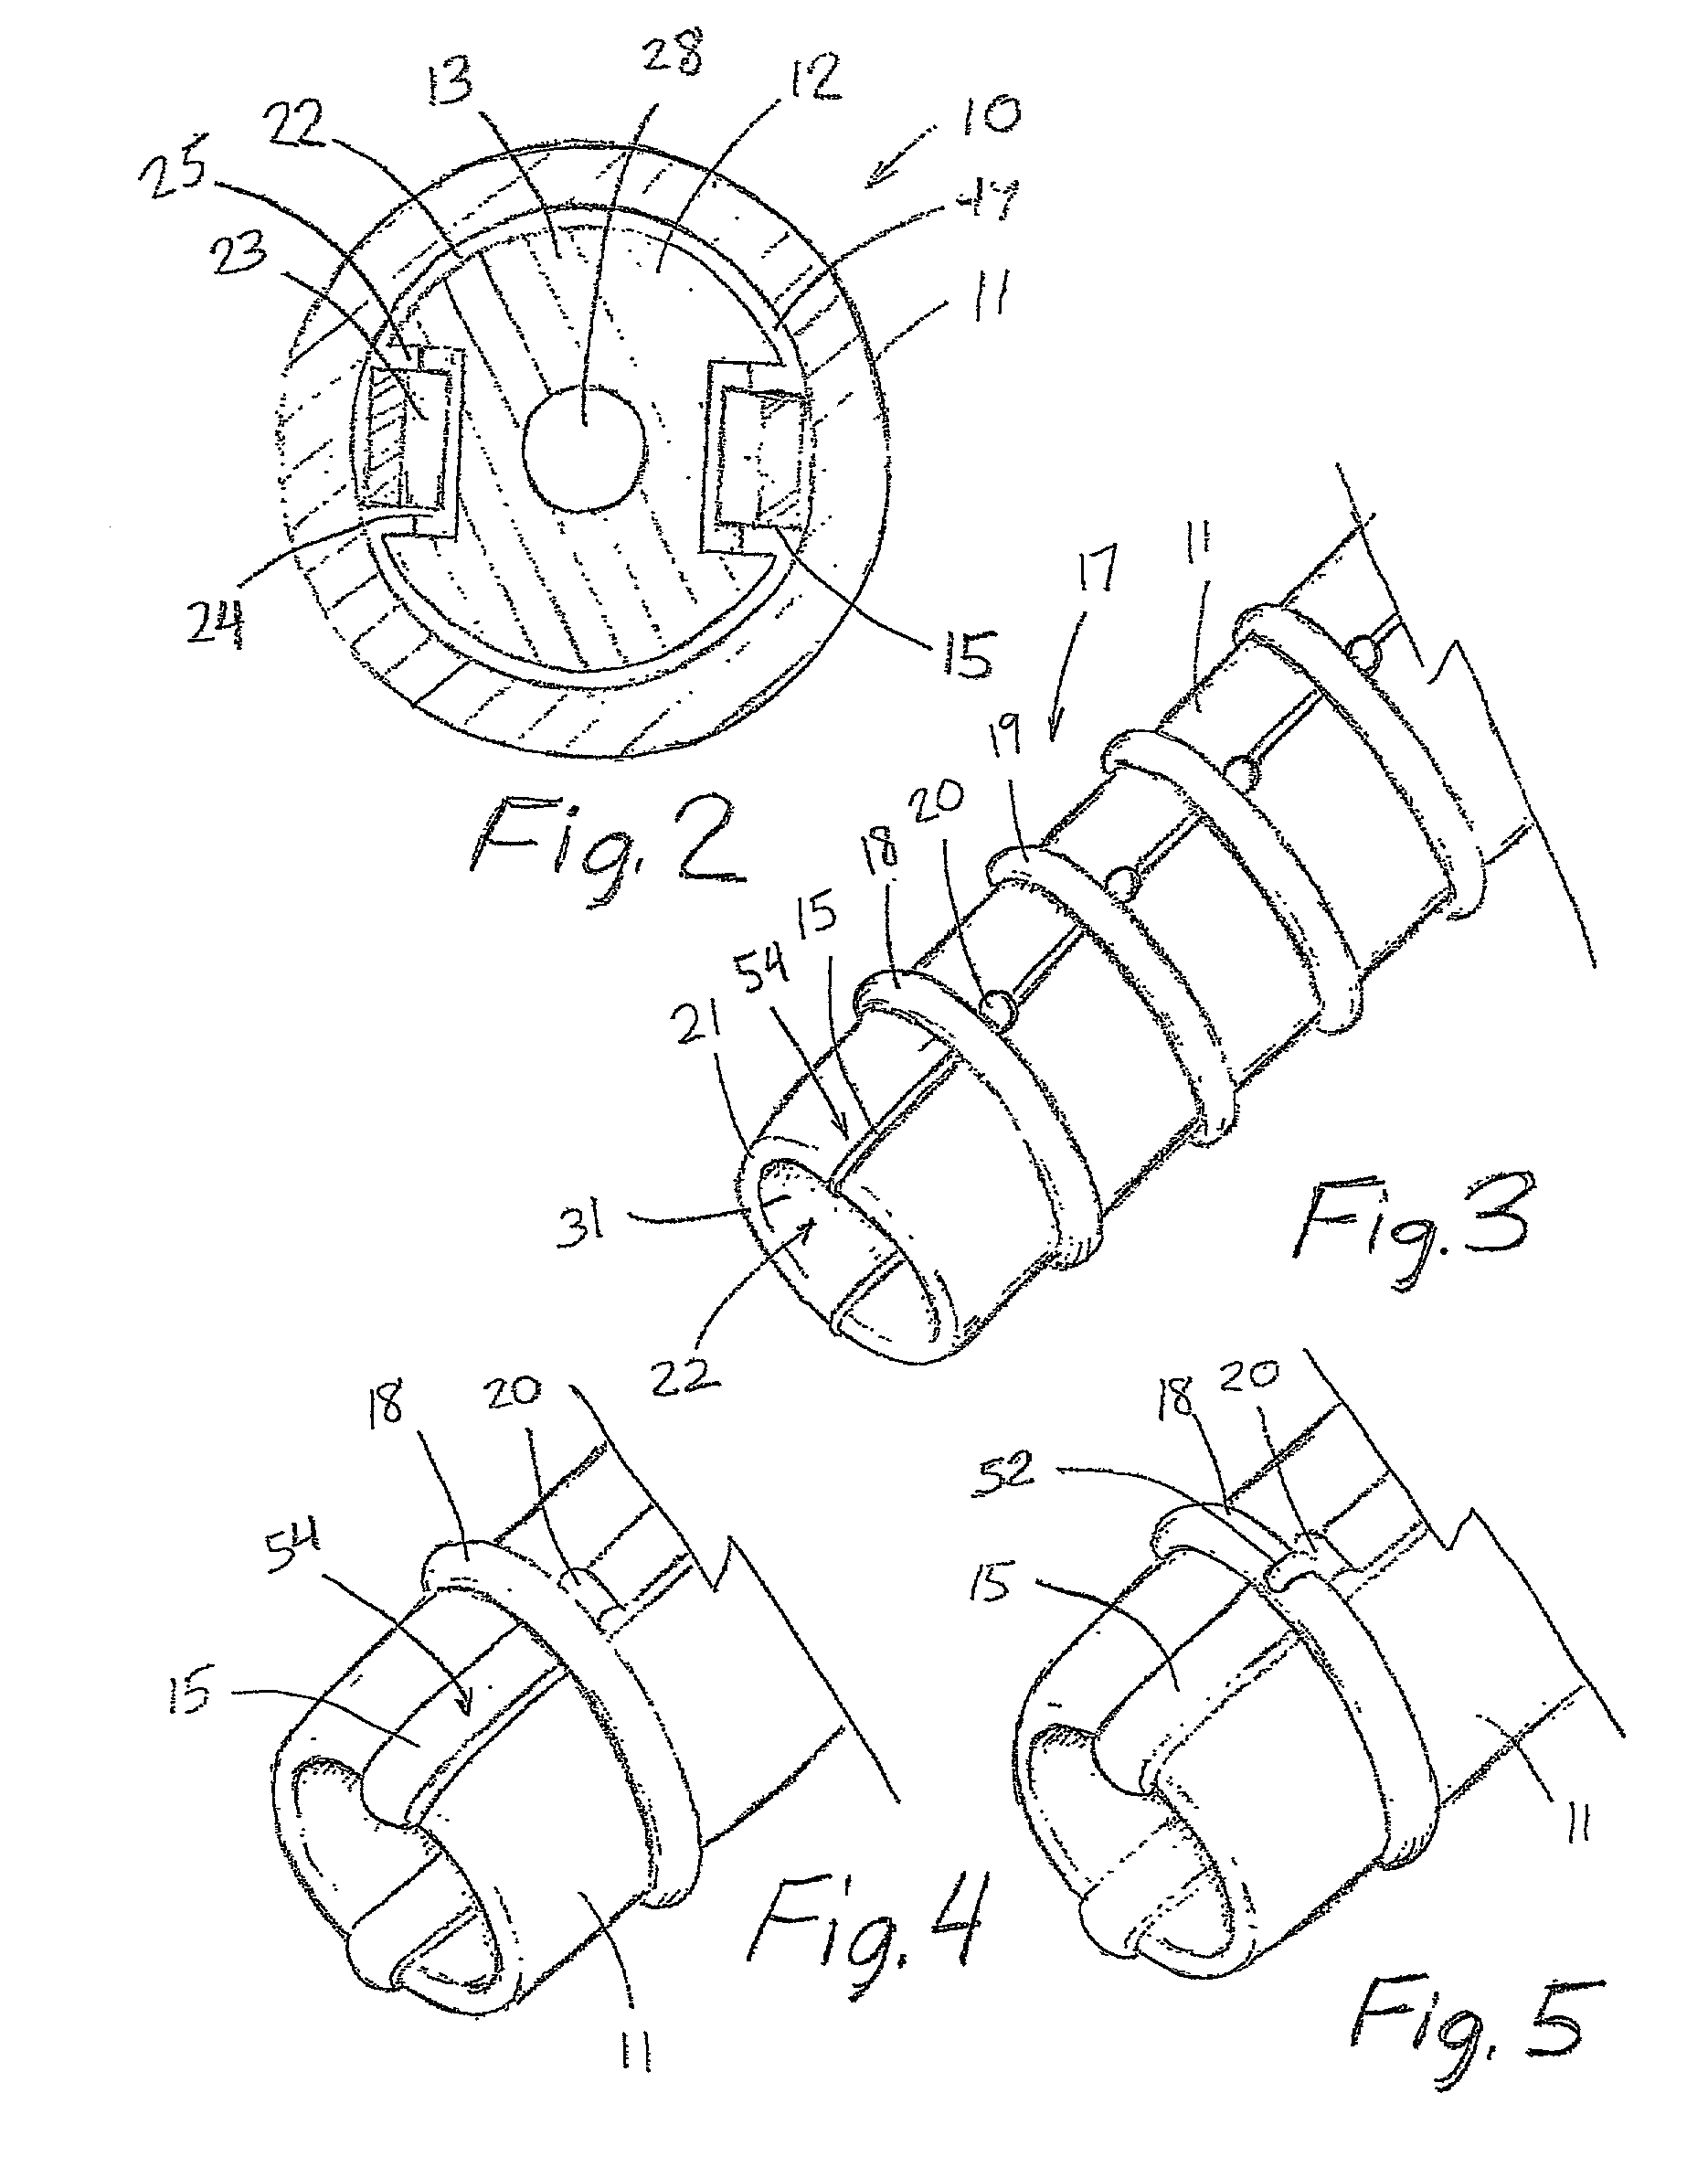 Ligating band delivery apparatus